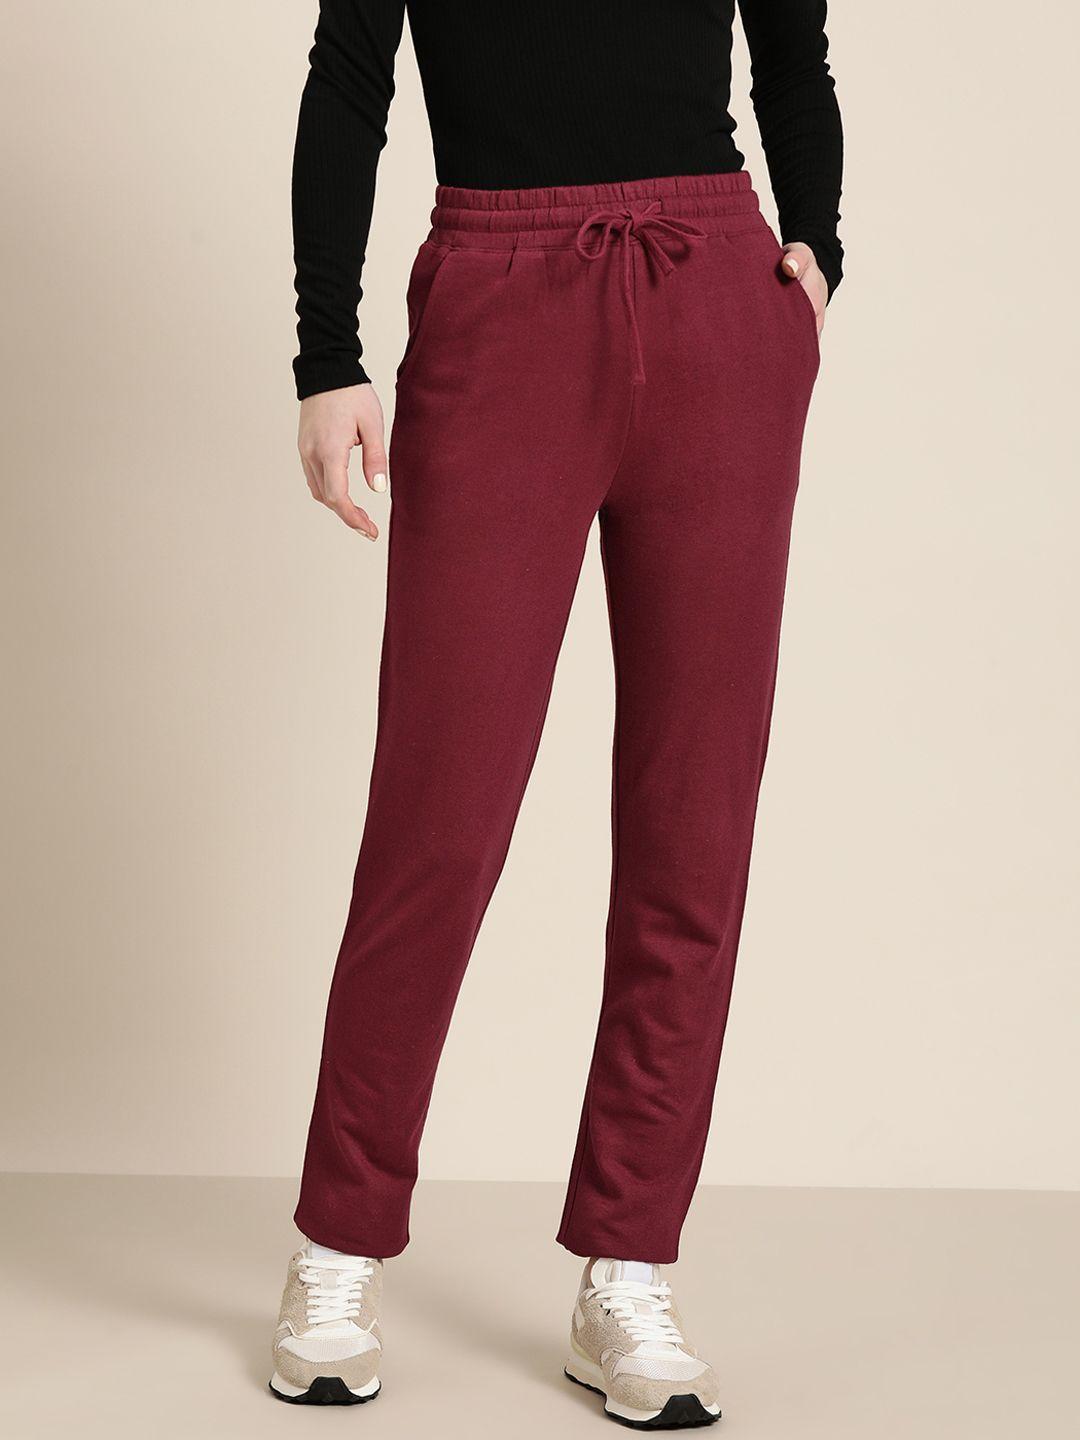 her by invictus women solid track pants